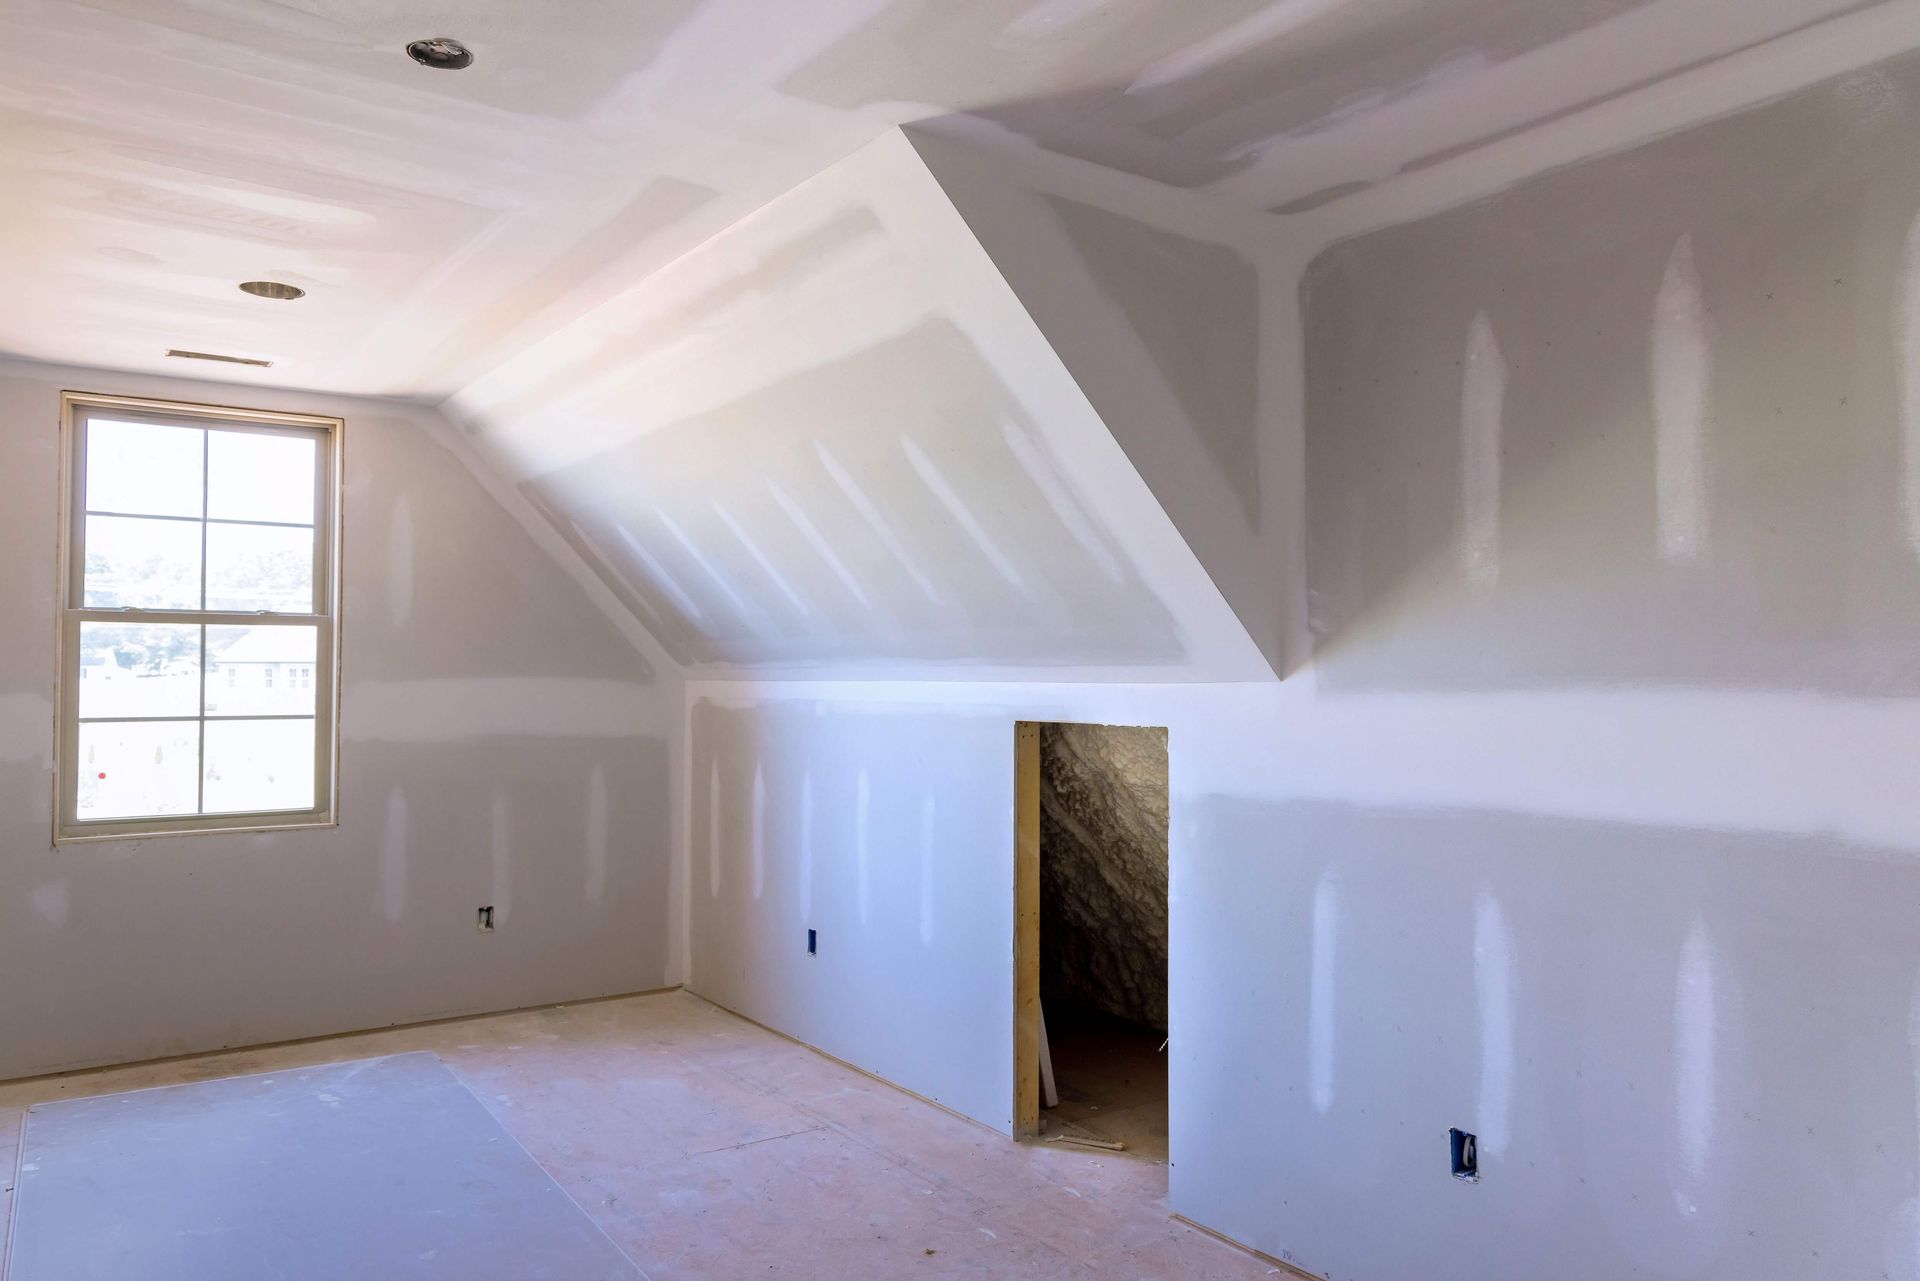 drywall contractors for home remodels